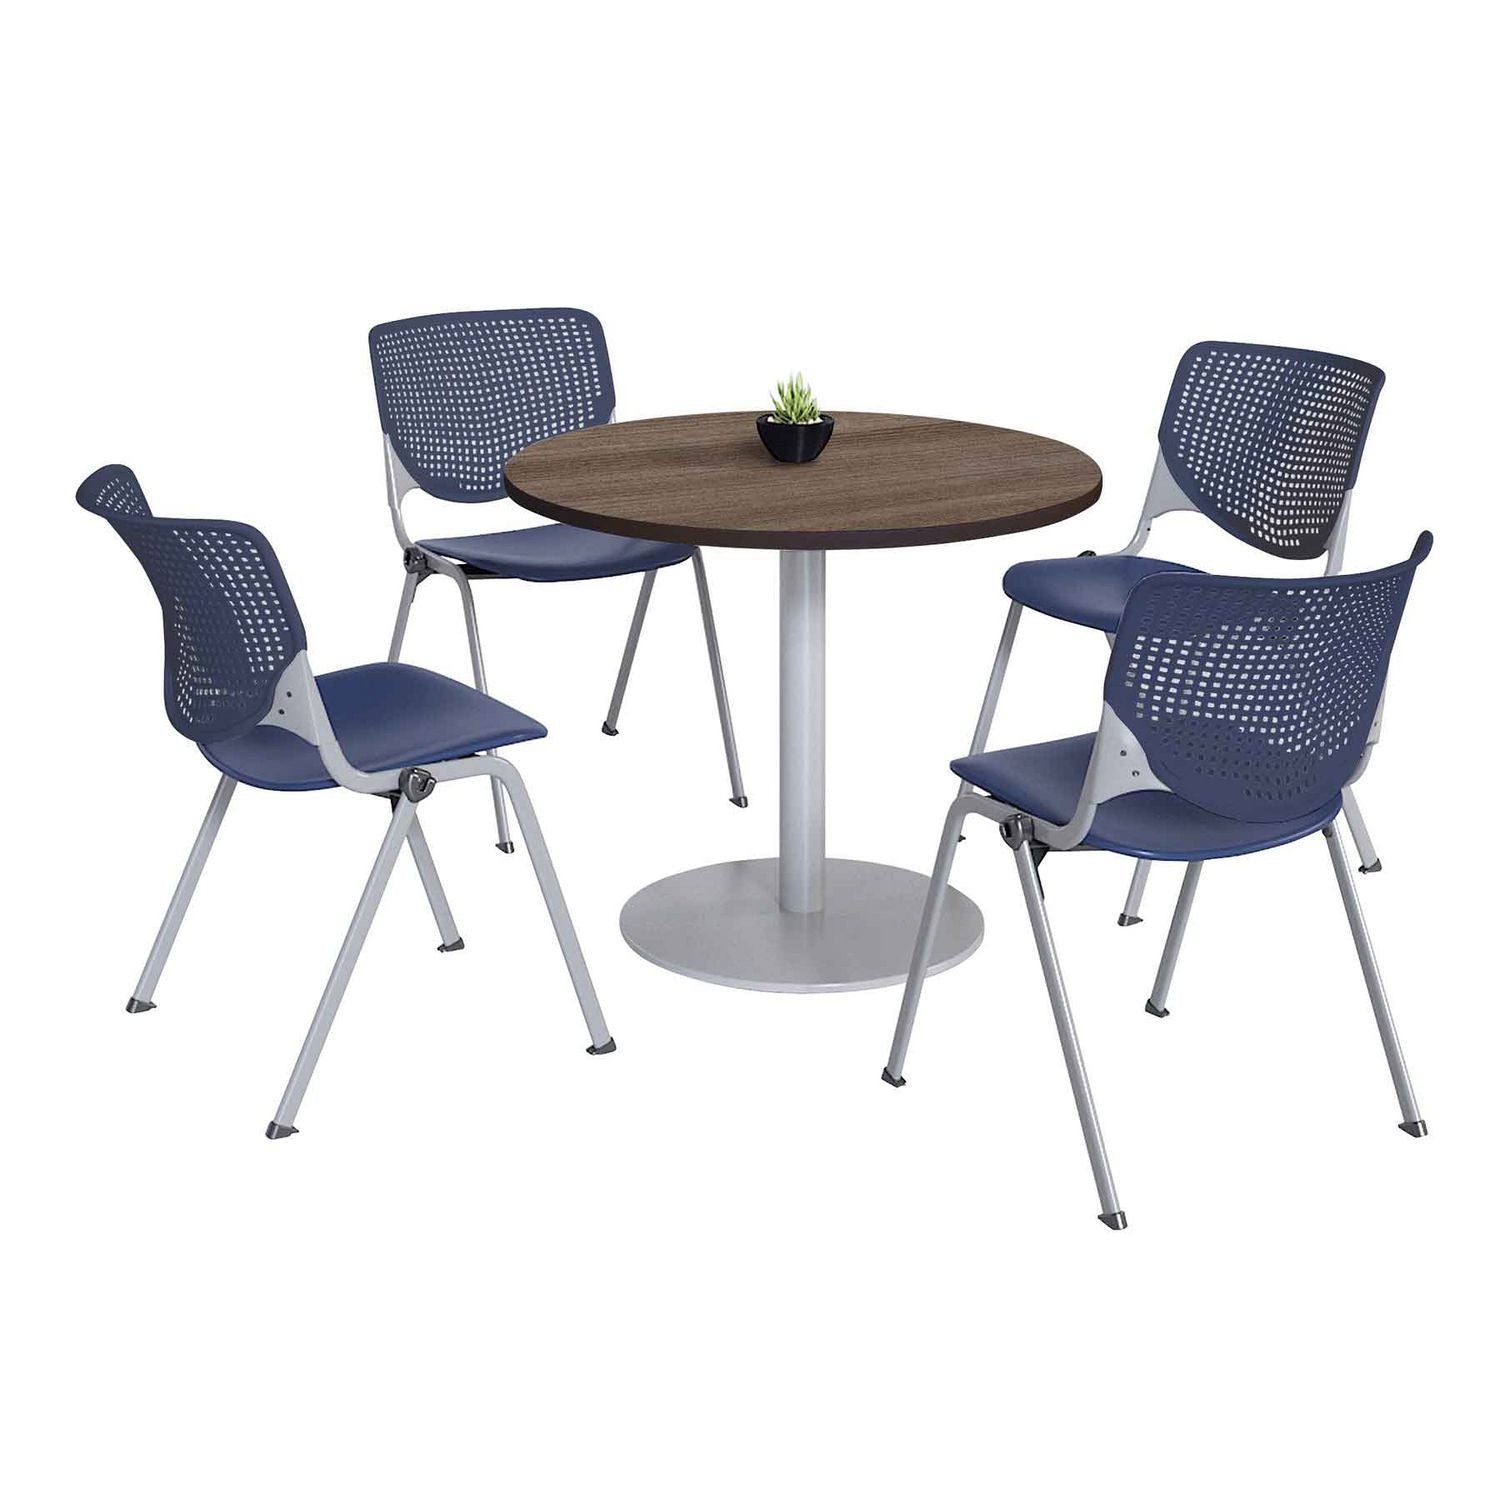 pedestal-table-with-four-navy-kool-series-chairs-round-36-dia-x-29h-studio-teak-ships-in-4-6-business-days_kfi811774036870 - 4